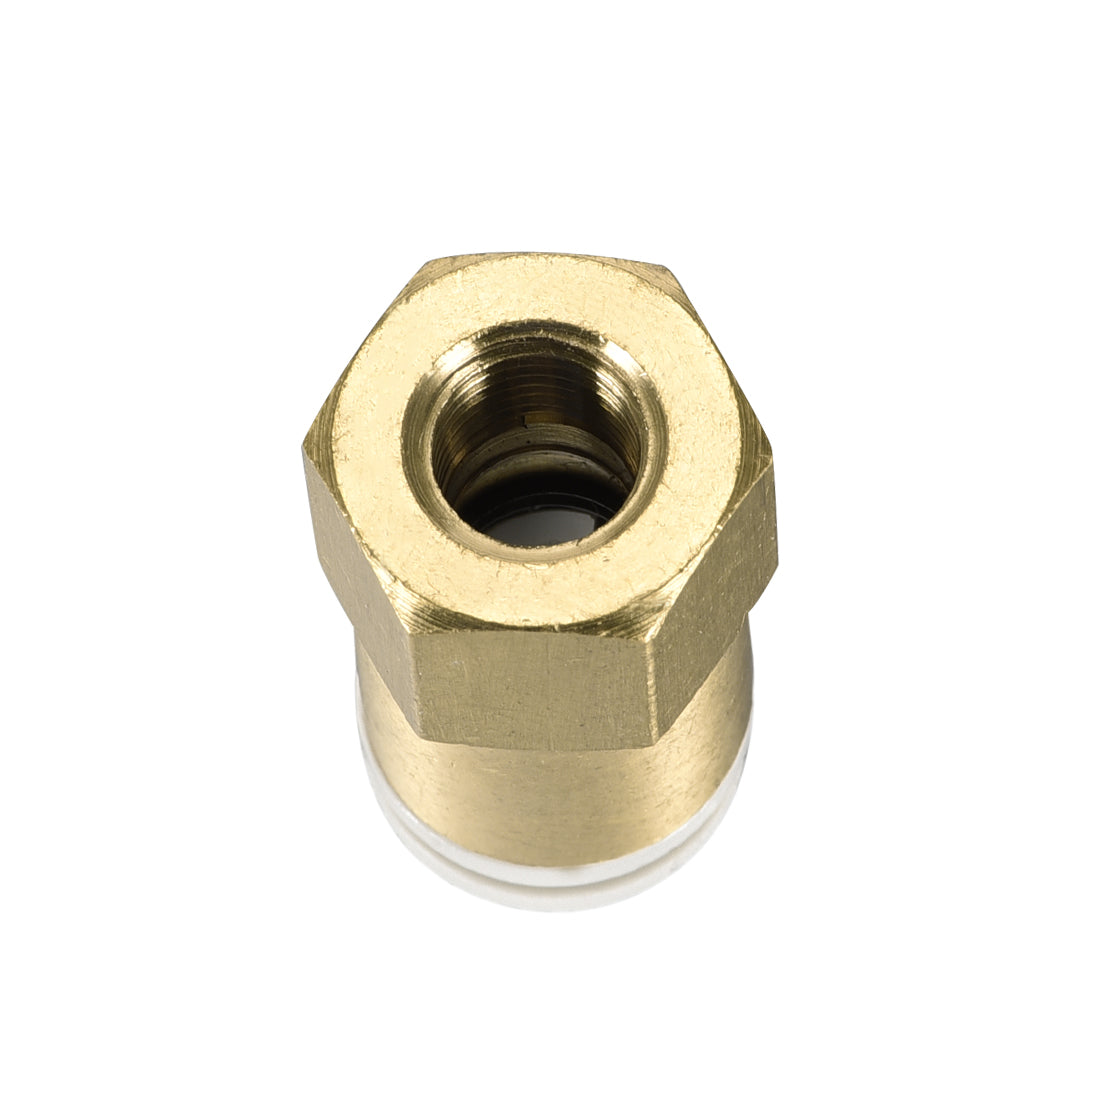 uxcell Uxcell Push to Connect Tube Fittings 10mm Tube OD x 1/8 PT Female Golden Tone 2Pcs